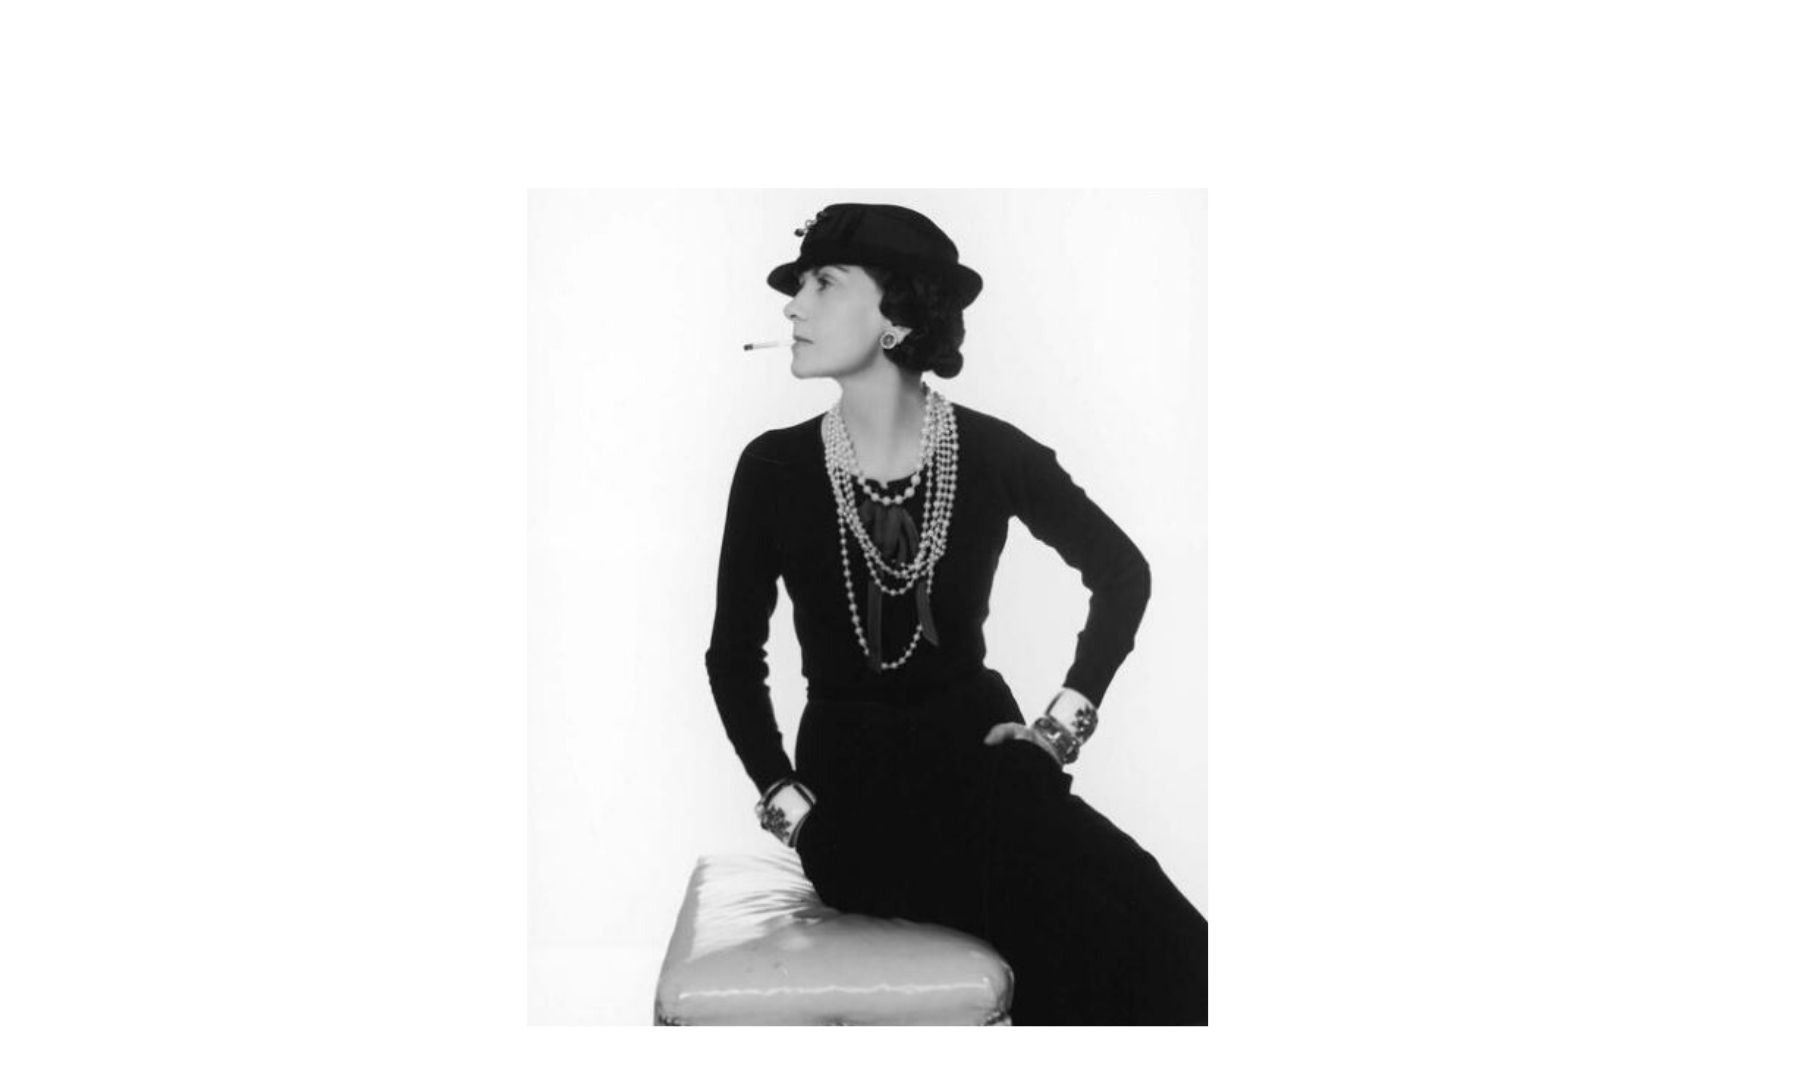 Coco Chanel – Perfection in Action - Angela van Rose